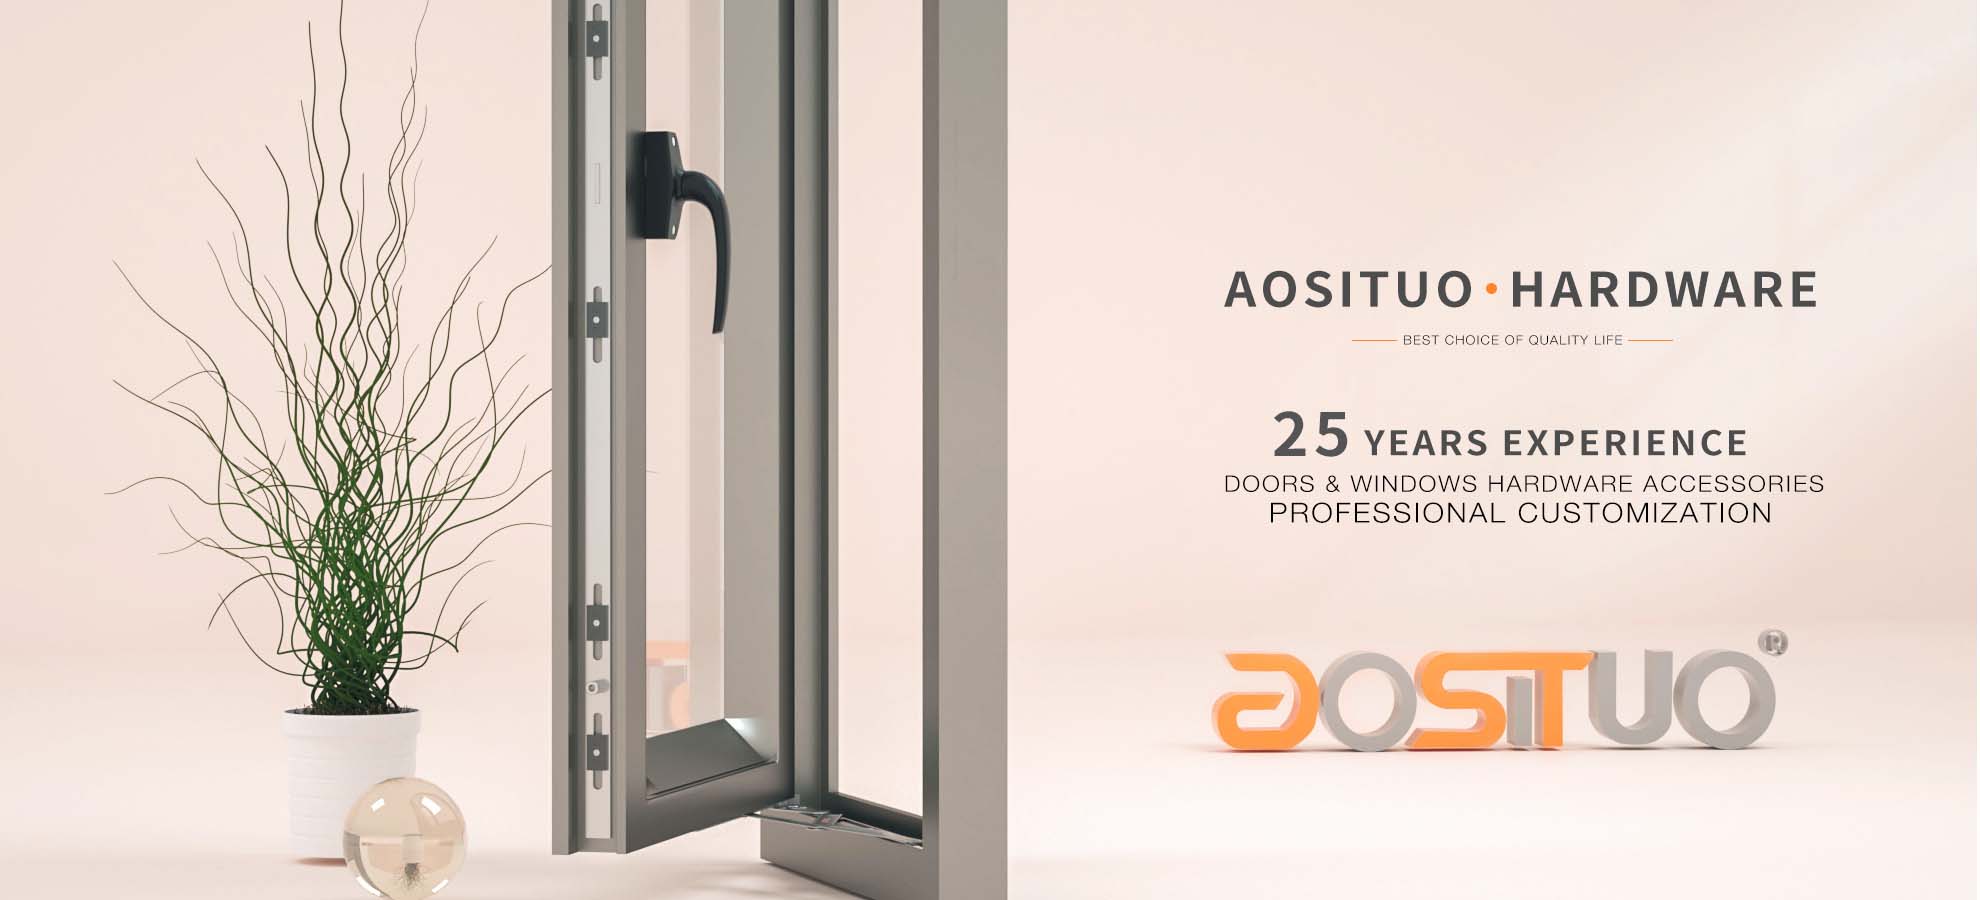 AOSITUO brand architectural hardware